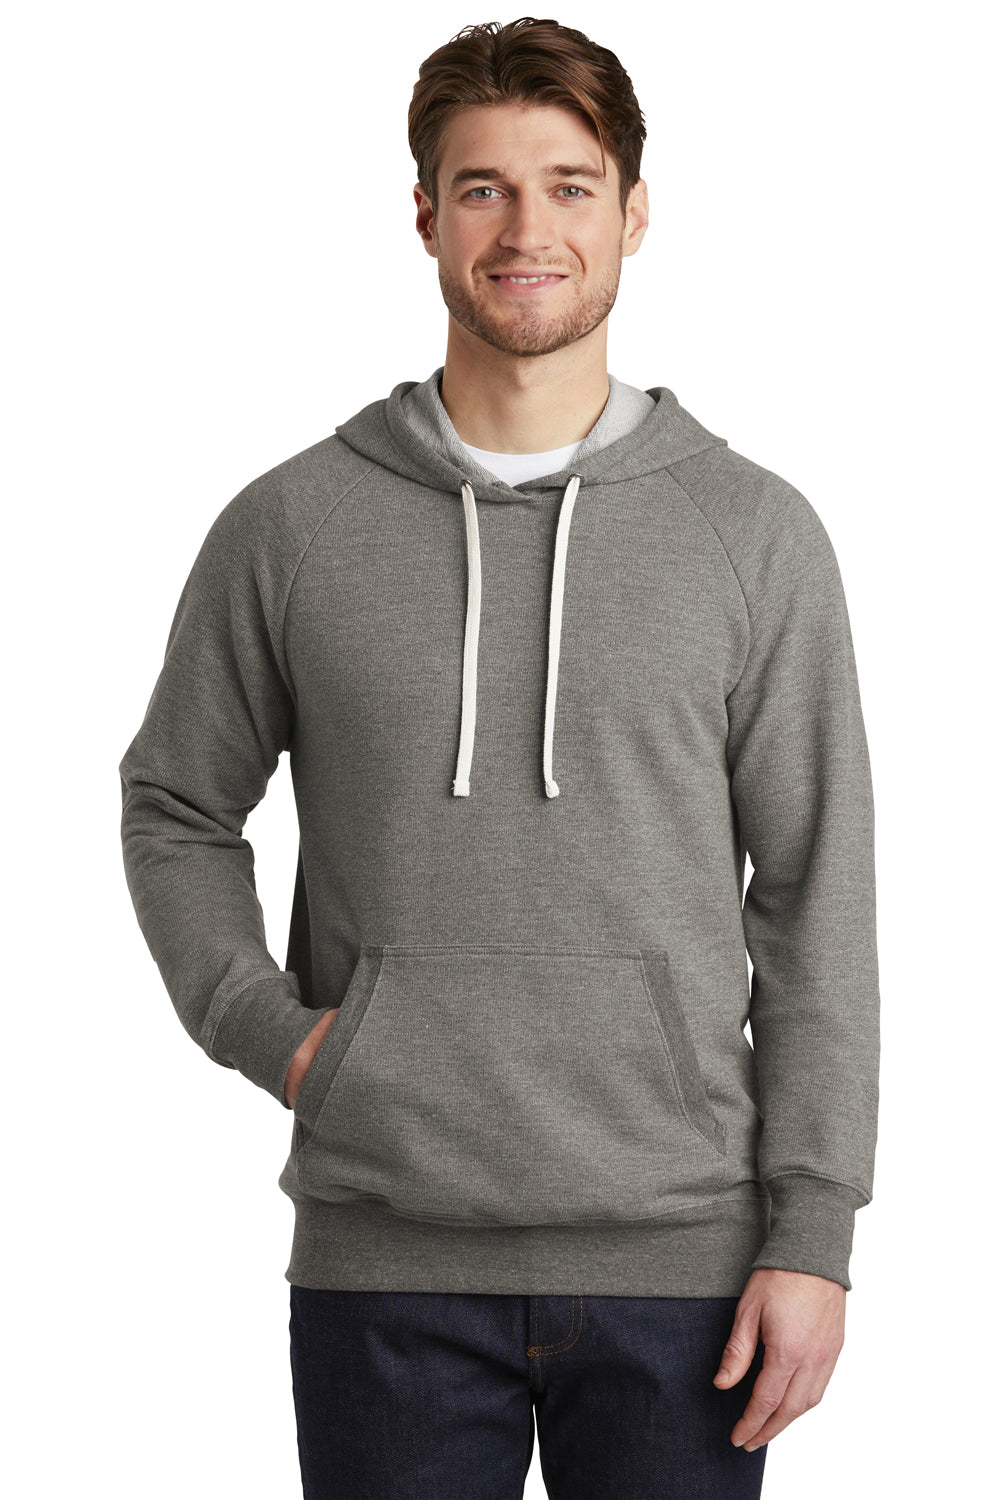 District DT355 Mens Perfect French Terry Hooded Sweatshirt Hoodie Grey Front